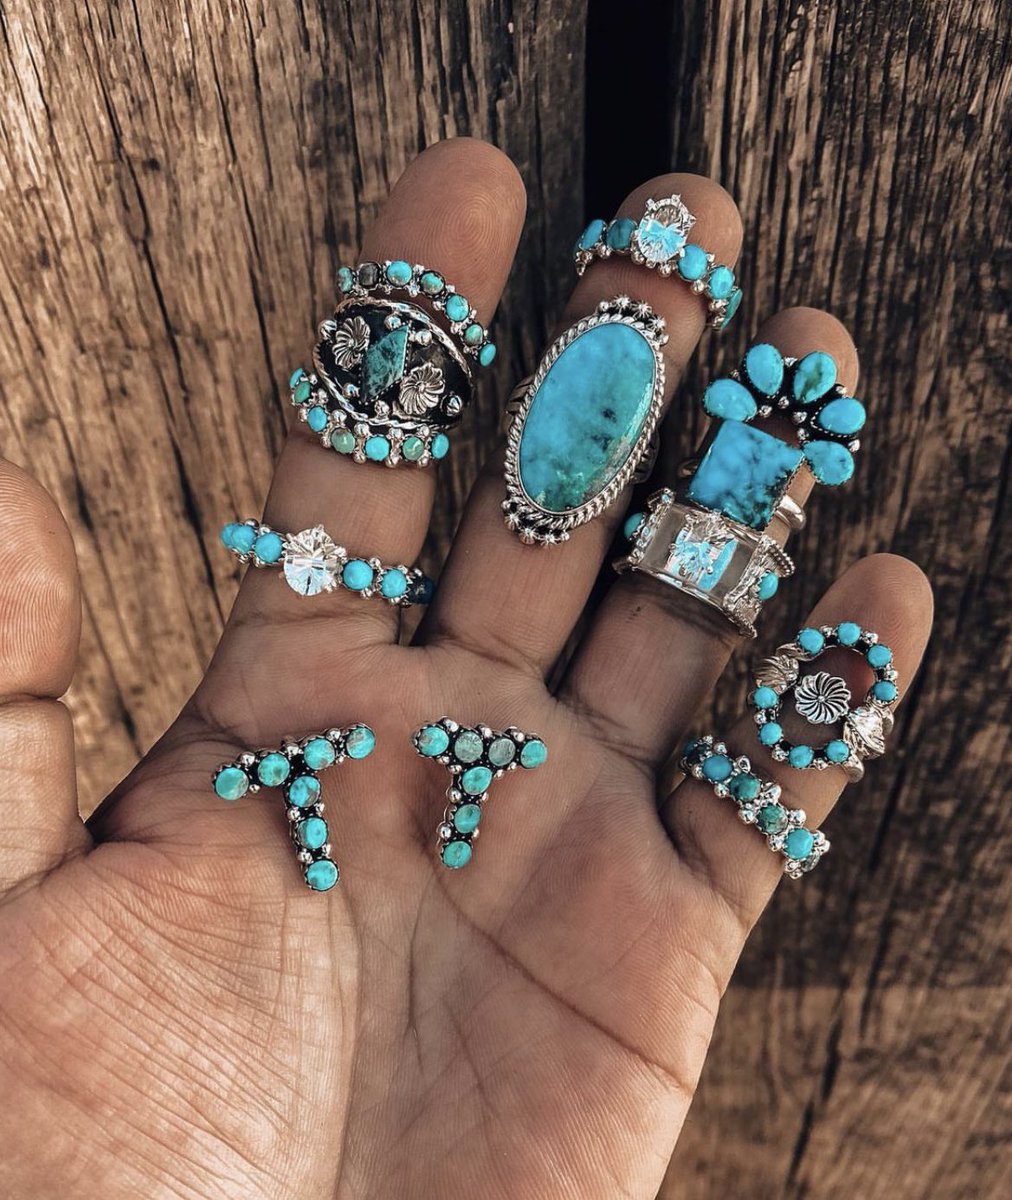 When they said “more the merrier”, y’all know they were talking about Turquoise! 💪⚡️✨

#turquoise #turquoisetuesday